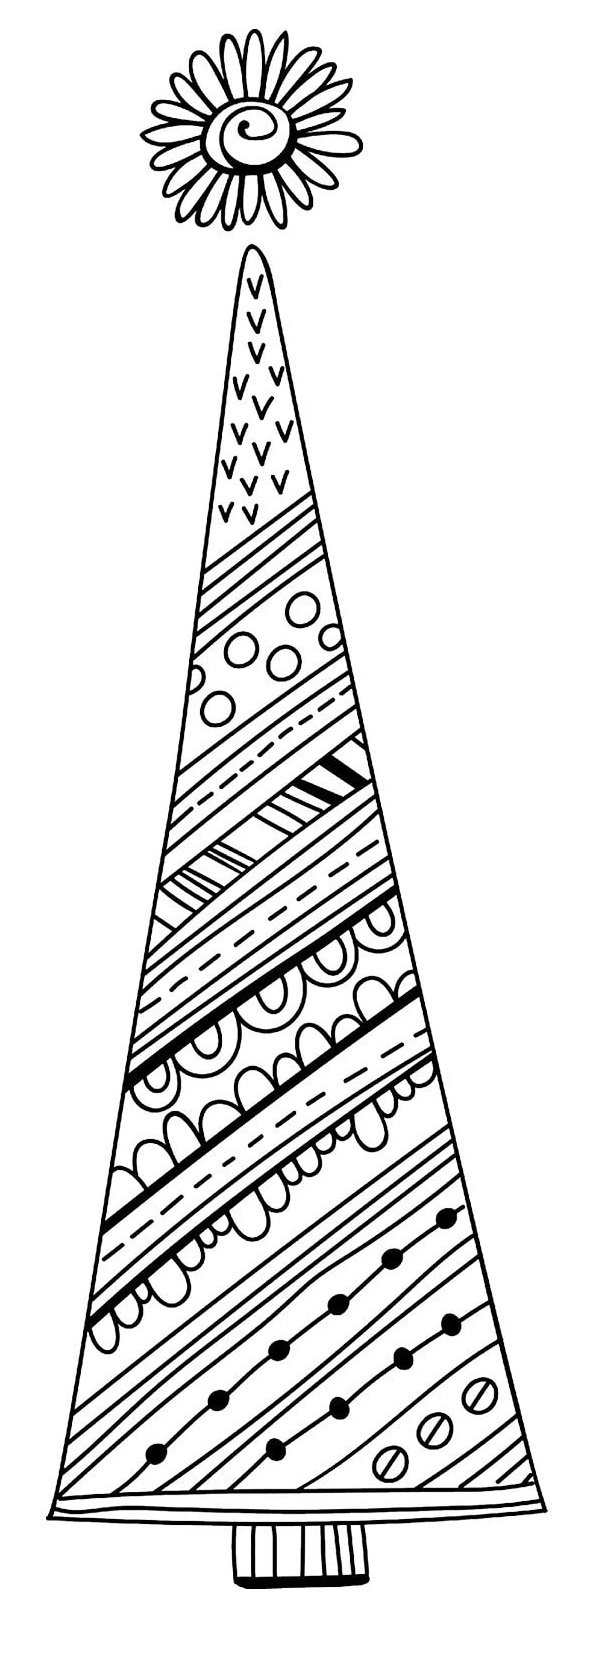 Tall Christmas Tree With Decorative Patterns Coloring Page